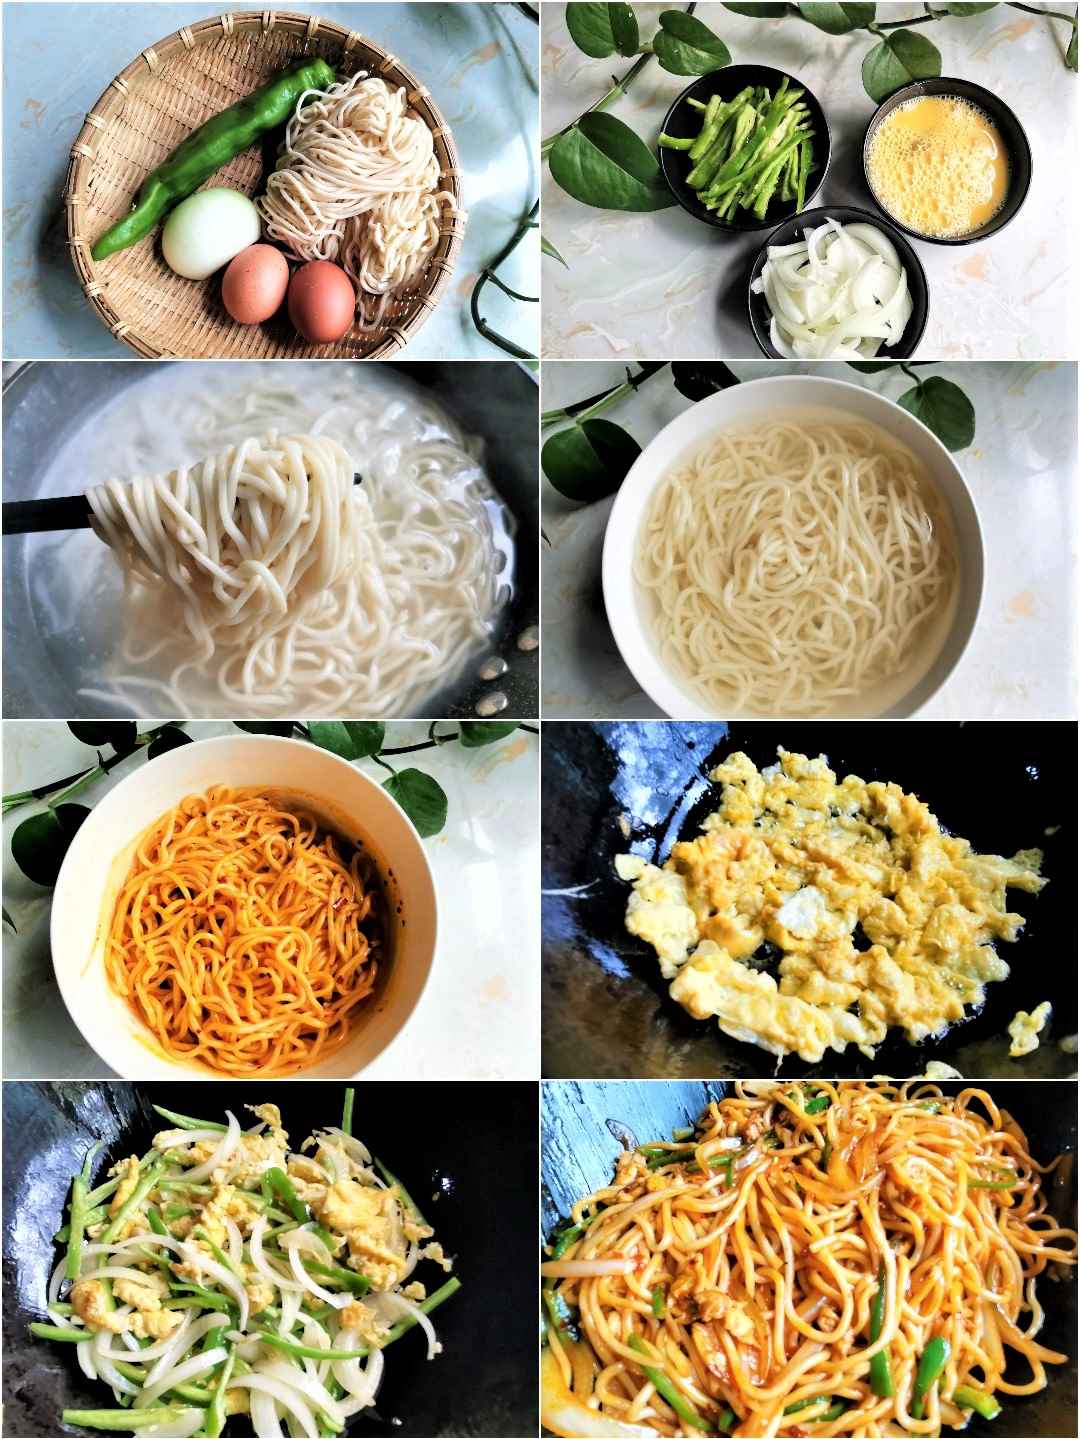 Stir-Fried Noodles with Chili garlic sauce Chinese Noodles recipes steps